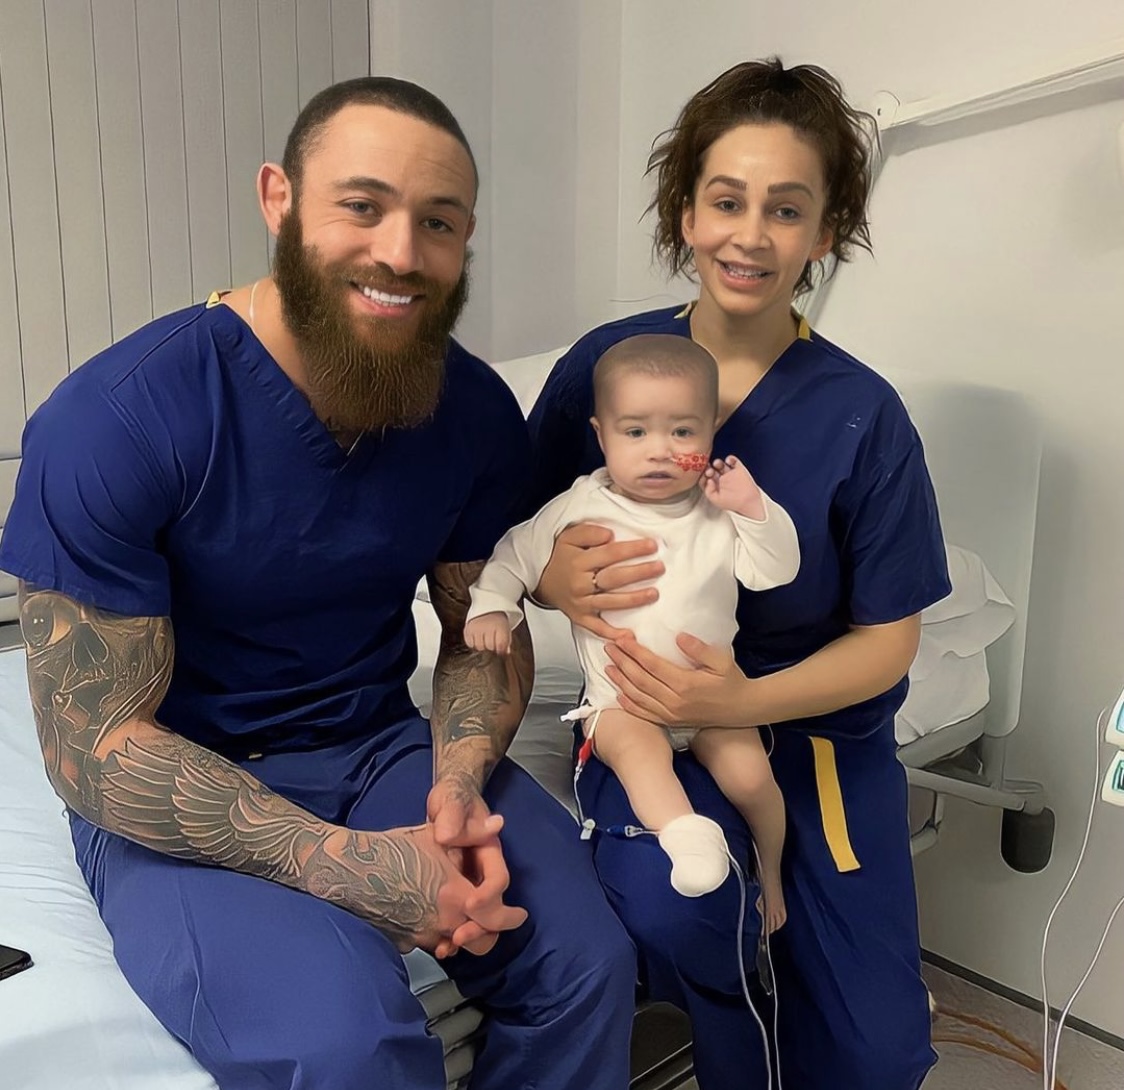 Ashley Cain's Eight-Month-Old Daughter Has ‘Days To Live’